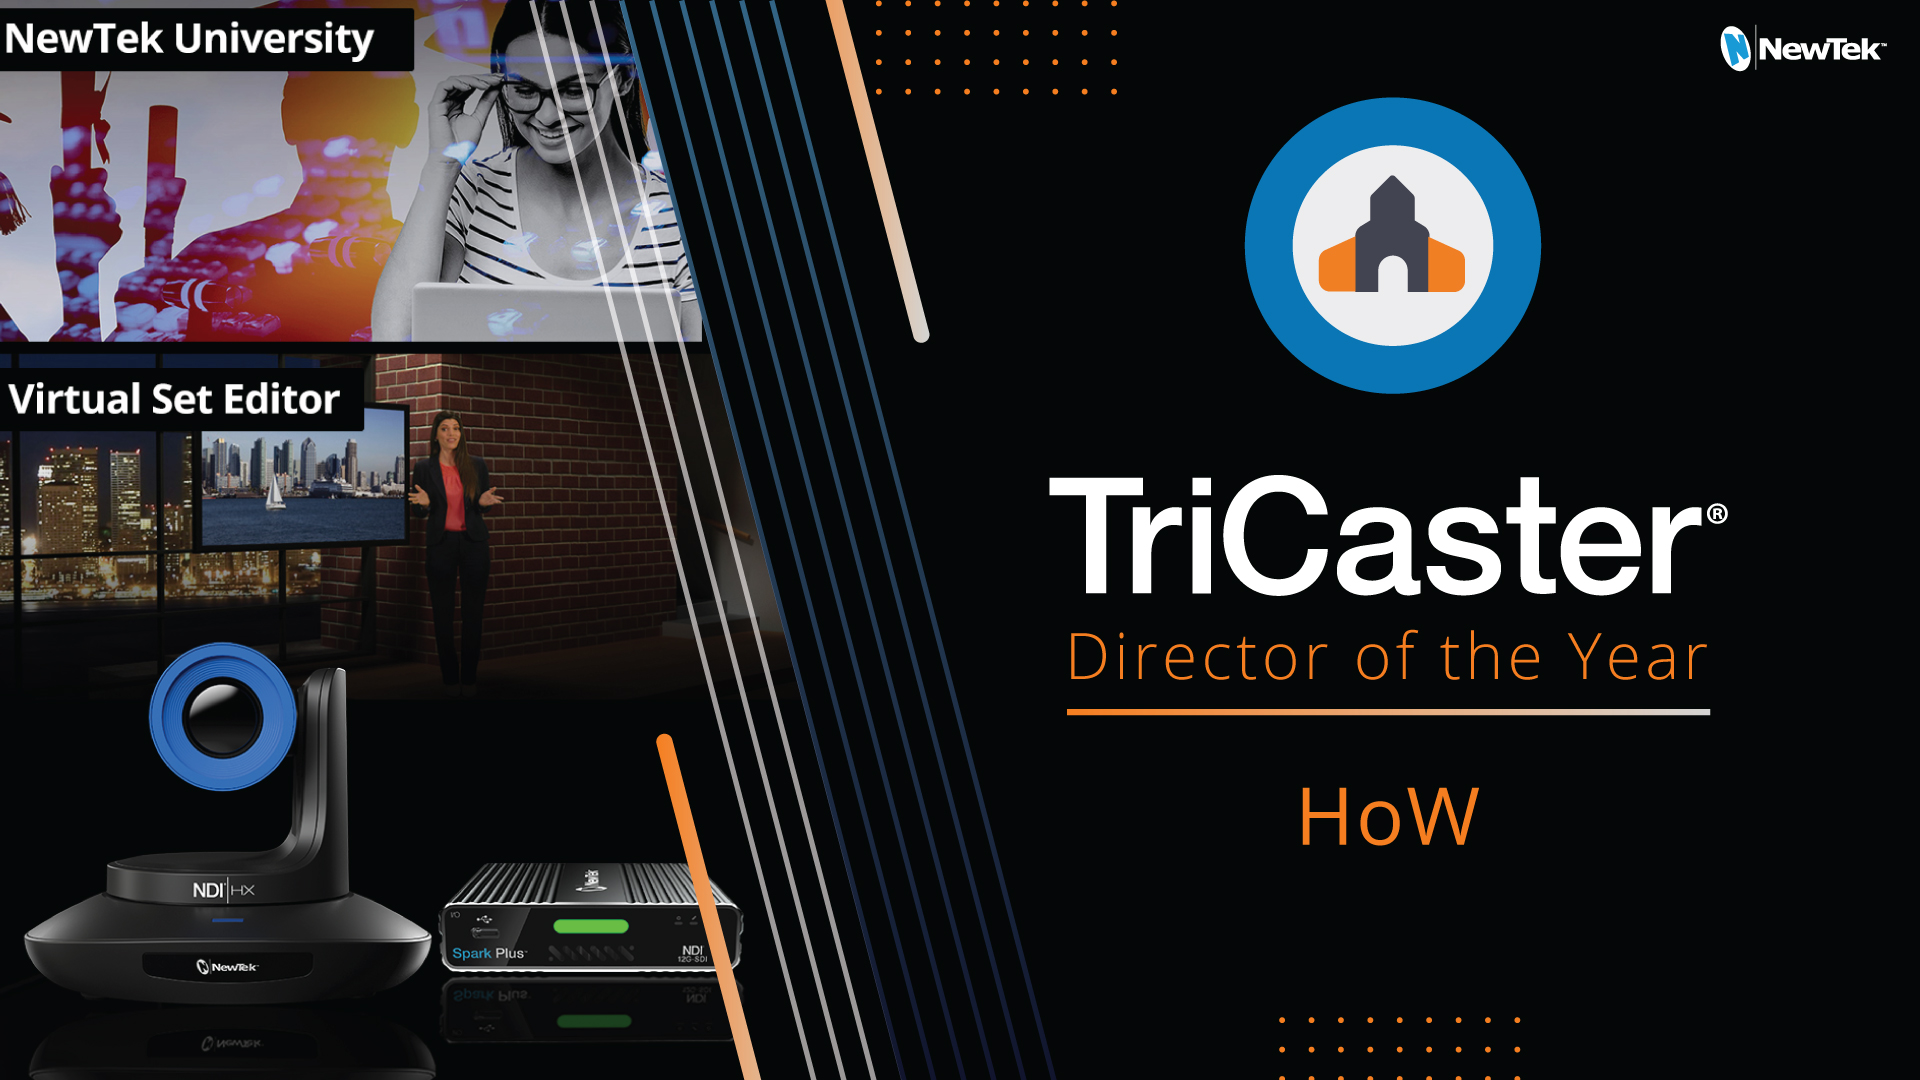 tricaster director of the year house of worship